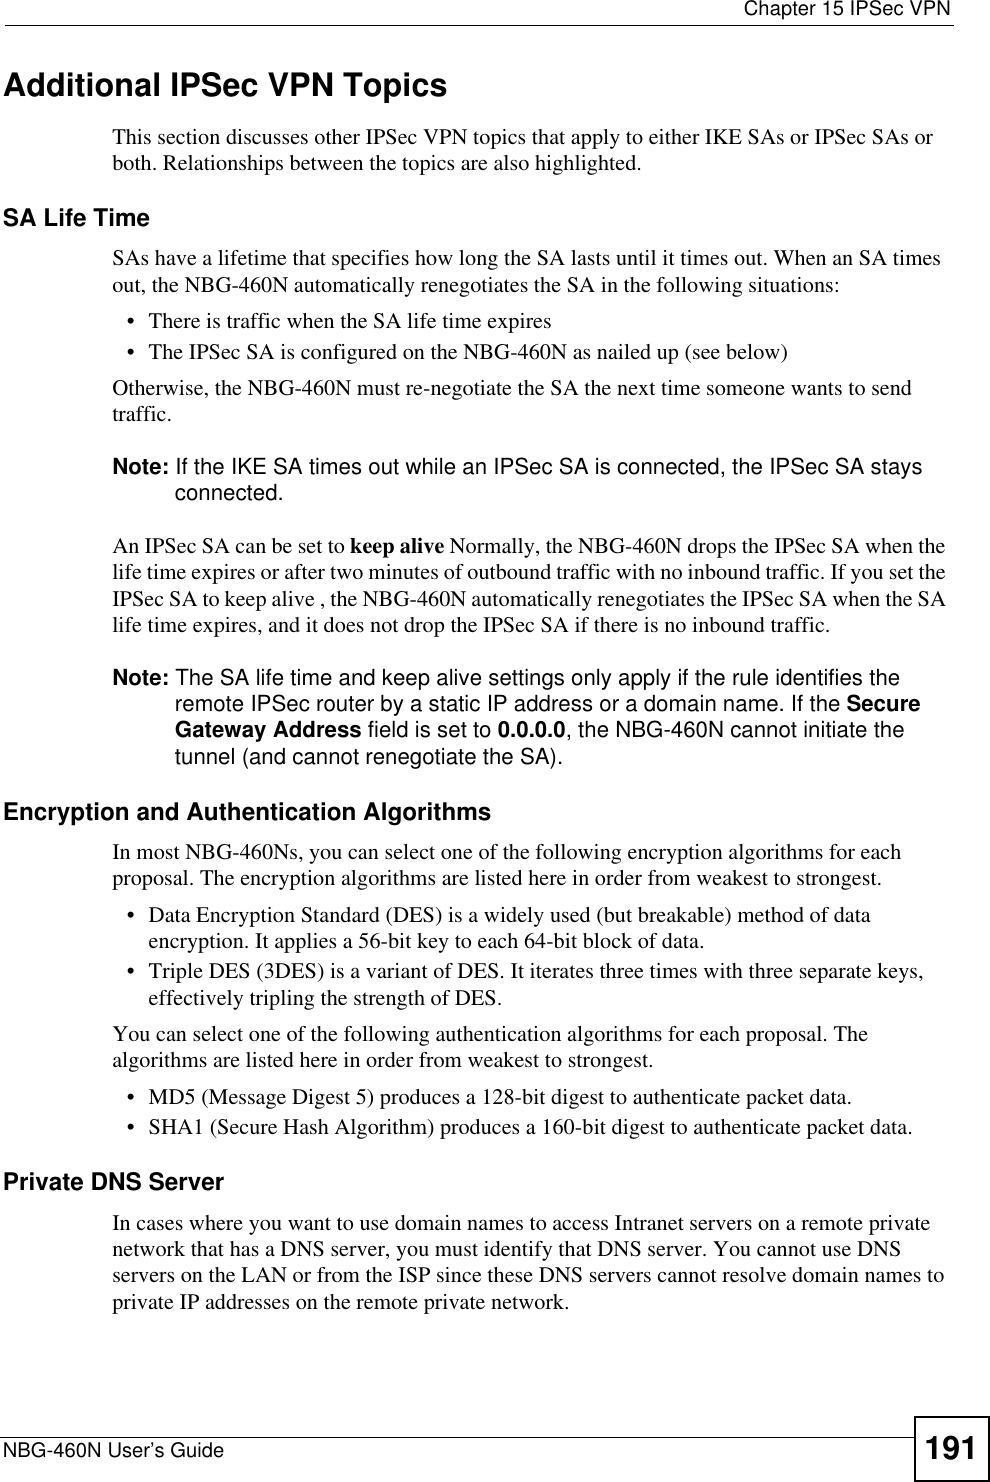  Chapter 15 IPSec VPNNBG-460N User’s Guide 191Additional IPSec VPN TopicsThis section discusses other IPSec VPN topics that apply to either IKE SAs or IPSec SAs or both. Relationships between the topics are also highlighted.SA Life TimeSAs have a lifetime that specifies how long the SA lasts until it times out. When an SA times out, the NBG-460N automatically renegotiates the SA in the following situations:• There is traffic when the SA life time expires• The IPSec SA is configured on the NBG-460N as nailed up (see below)Otherwise, the NBG-460N must re-negotiate the SA the next time someone wants to send traffic.Note: If the IKE SA times out while an IPSec SA is connected, the IPSec SA stays connected.An IPSec SA can be set to keep alive Normally, the NBG-460N drops the IPSec SA when the life time expires or after two minutes of outbound traffic with no inbound traffic. If you set the IPSec SA to keep alive , the NBG-460N automatically renegotiates the IPSec SA when the SA life time expires, and it does not drop the IPSec SA if there is no inbound traffic.Note: The SA life time and keep alive settings only apply if the rule identifies the remote IPSec router by a static IP address or a domain name. If the Secure Gateway Address field is set to 0.0.0.0, the NBG-460N cannot initiate the tunnel (and cannot renegotiate the SA).Encryption and Authentication AlgorithmsIn most NBG-460Ns, you can select one of the following encryption algorithms for each proposal. The encryption algorithms are listed here in order from weakest to strongest.• Data Encryption Standard (DES) is a widely used (but breakable) method of data encryption. It applies a 56-bit key to each 64-bit block of data.• Triple DES (3DES) is a variant of DES. It iterates three times with three separate keys, effectively tripling the strength of DES.You can select one of the following authentication algorithms for each proposal. The algorithms are listed here in order from weakest to strongest.• MD5 (Message Digest 5) produces a 128-bit digest to authenticate packet data.• SHA1 (Secure Hash Algorithm) produces a 160-bit digest to authenticate packet data.Private DNS ServerIn cases where you want to use domain names to access Intranet servers on a remote private network that has a DNS server, you must identify that DNS server. You cannot use DNS servers on the LAN or from the ISP since these DNS servers cannot resolve domain names to private IP addresses on the remote private network.